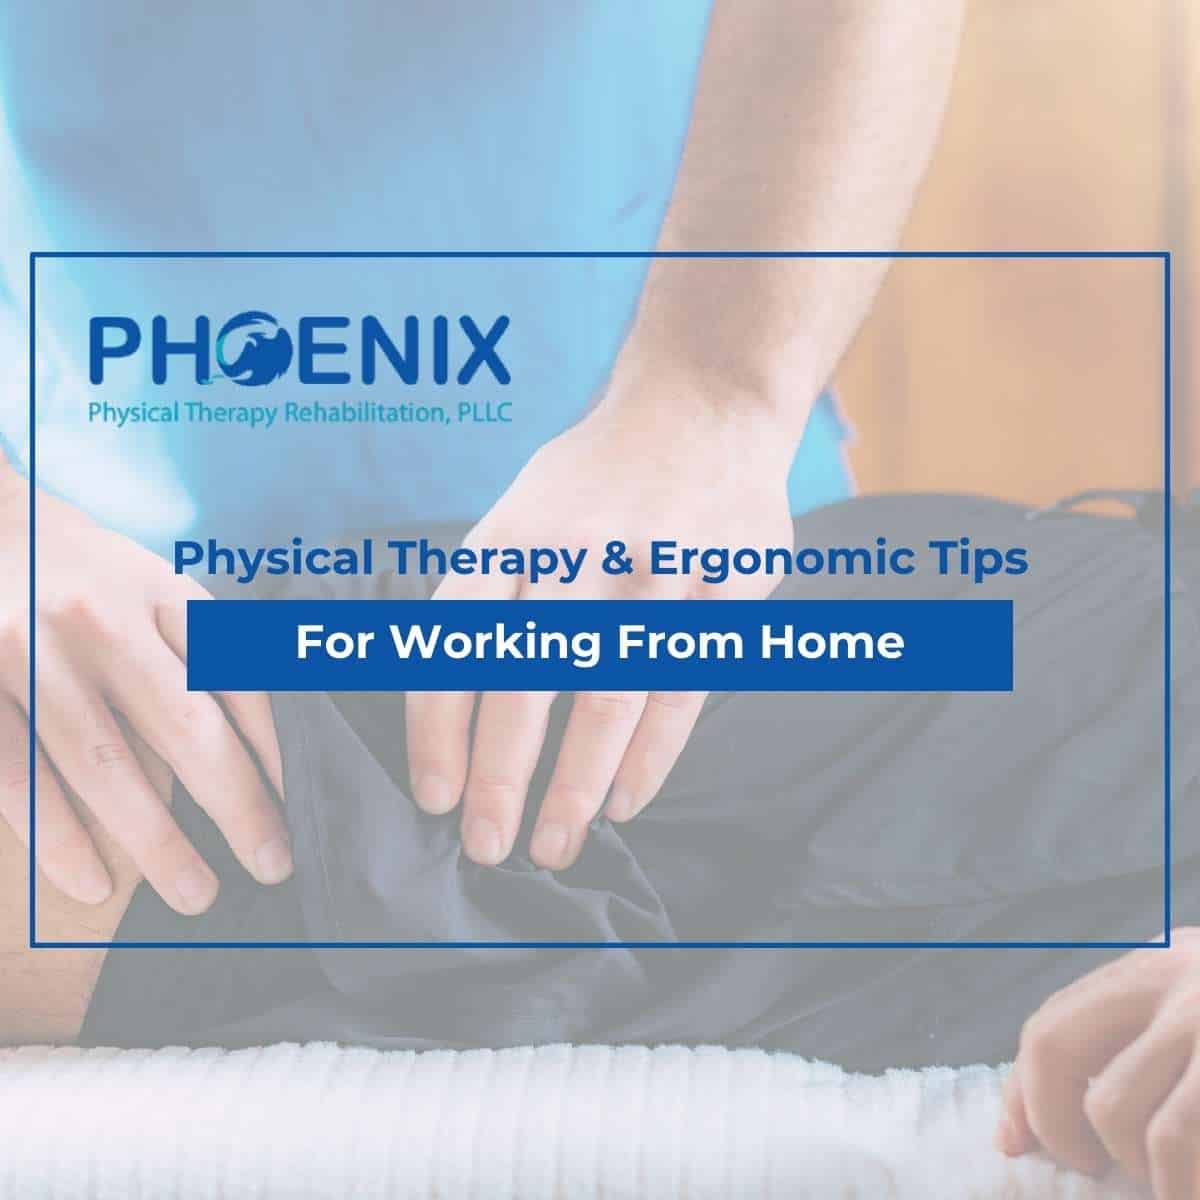 Physical Therapy & Ergonomic Tips For Working From Home